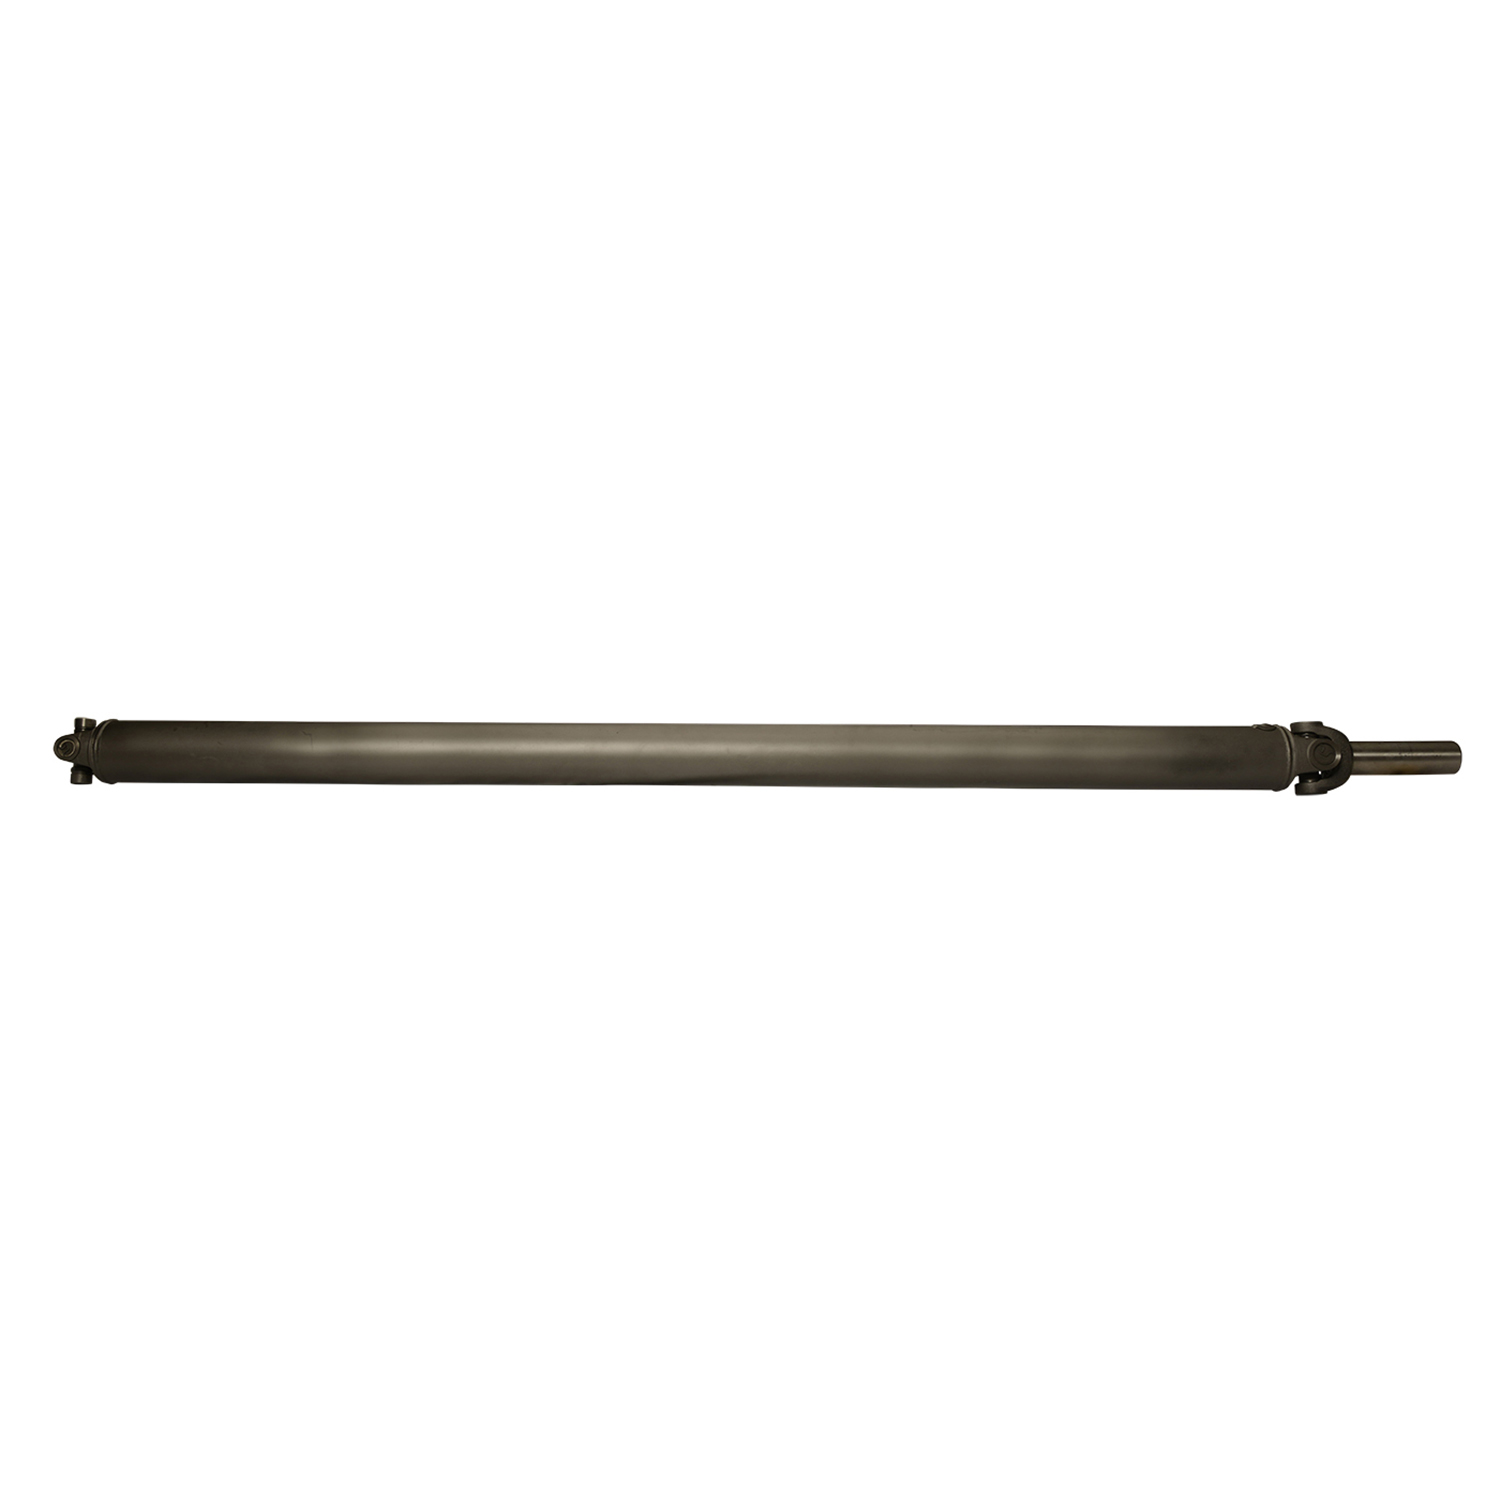 USA Standard ZDS9354 Rear Driveshaft, For GM Blazer S10, 31 in. Center-To-Center